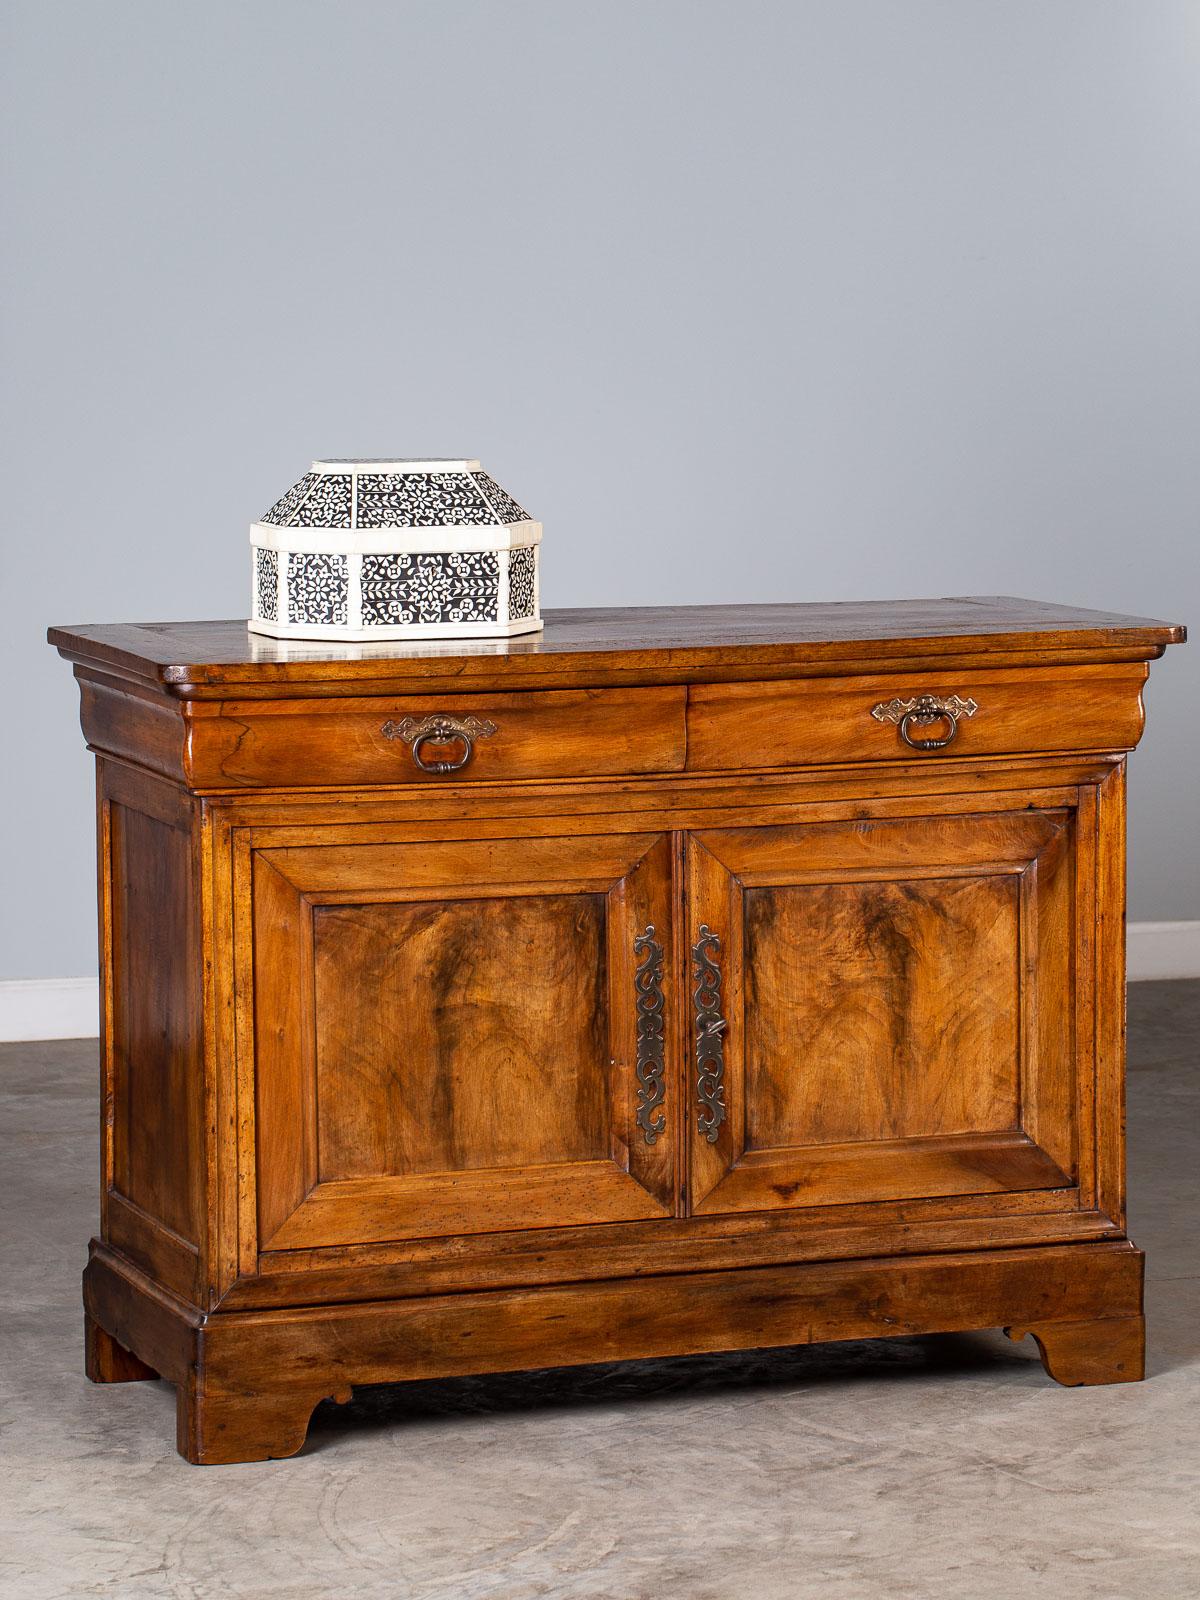 An excellent Louis Philippe antique French walnut buffet circa 1850 with two drawers above two cabinet doors. The clean lines of the Louis Philippe period in France (1830-1848) remains totally modern in its simplicity. The best Louis Philippe